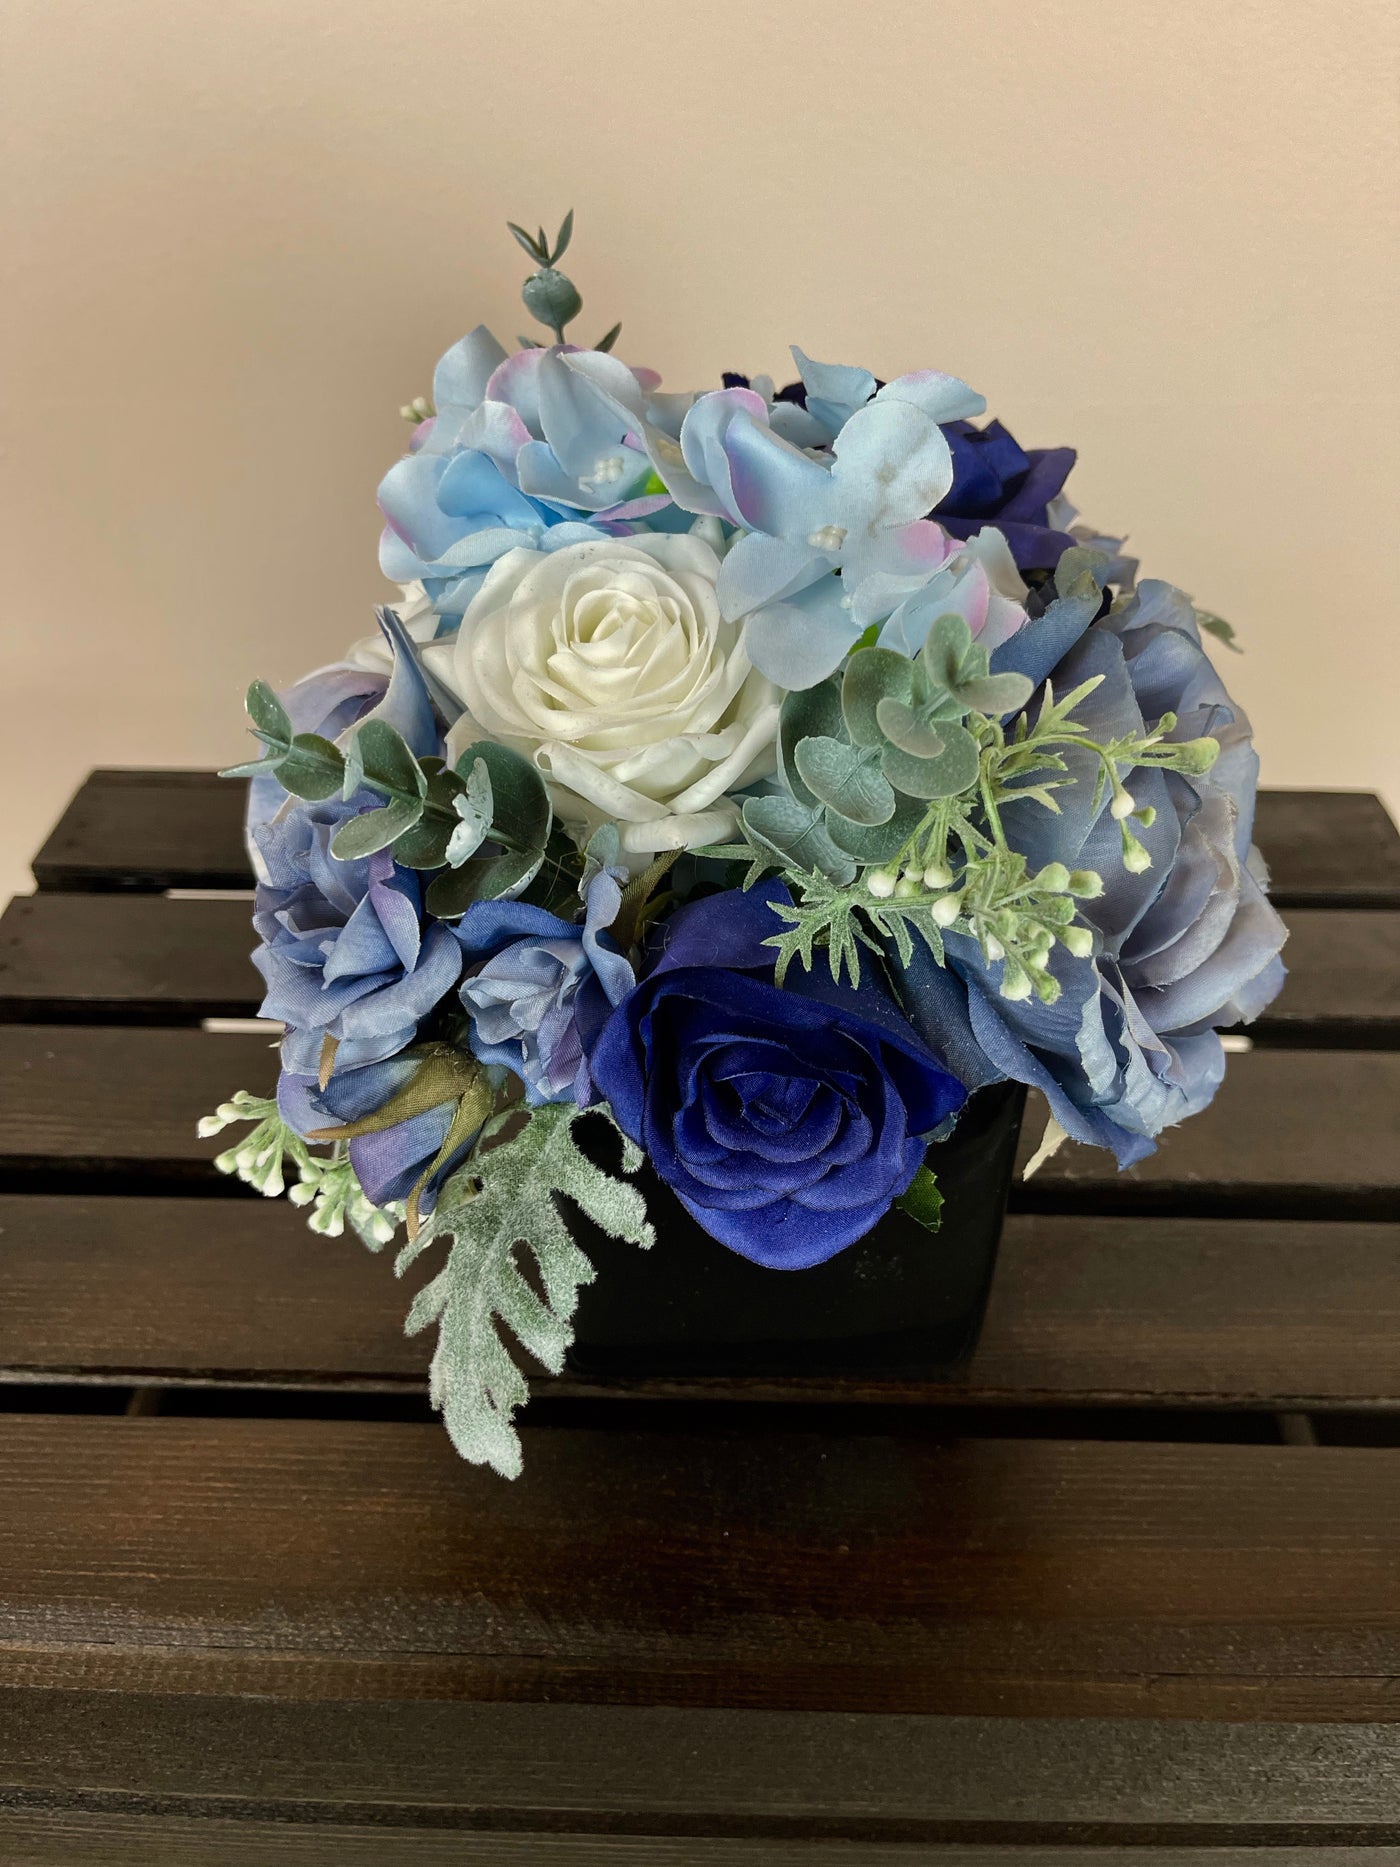 This sophisticated medley of navy, light blue, and white roses, hydrangeas, orchids, and blueberries is accented by eucalyptus and dusty miller foliage to craft a gorgeous centrepiece for a raised cocktail table. Measuring 4" x 4", the florals are cascading our of a square glossy black vase.